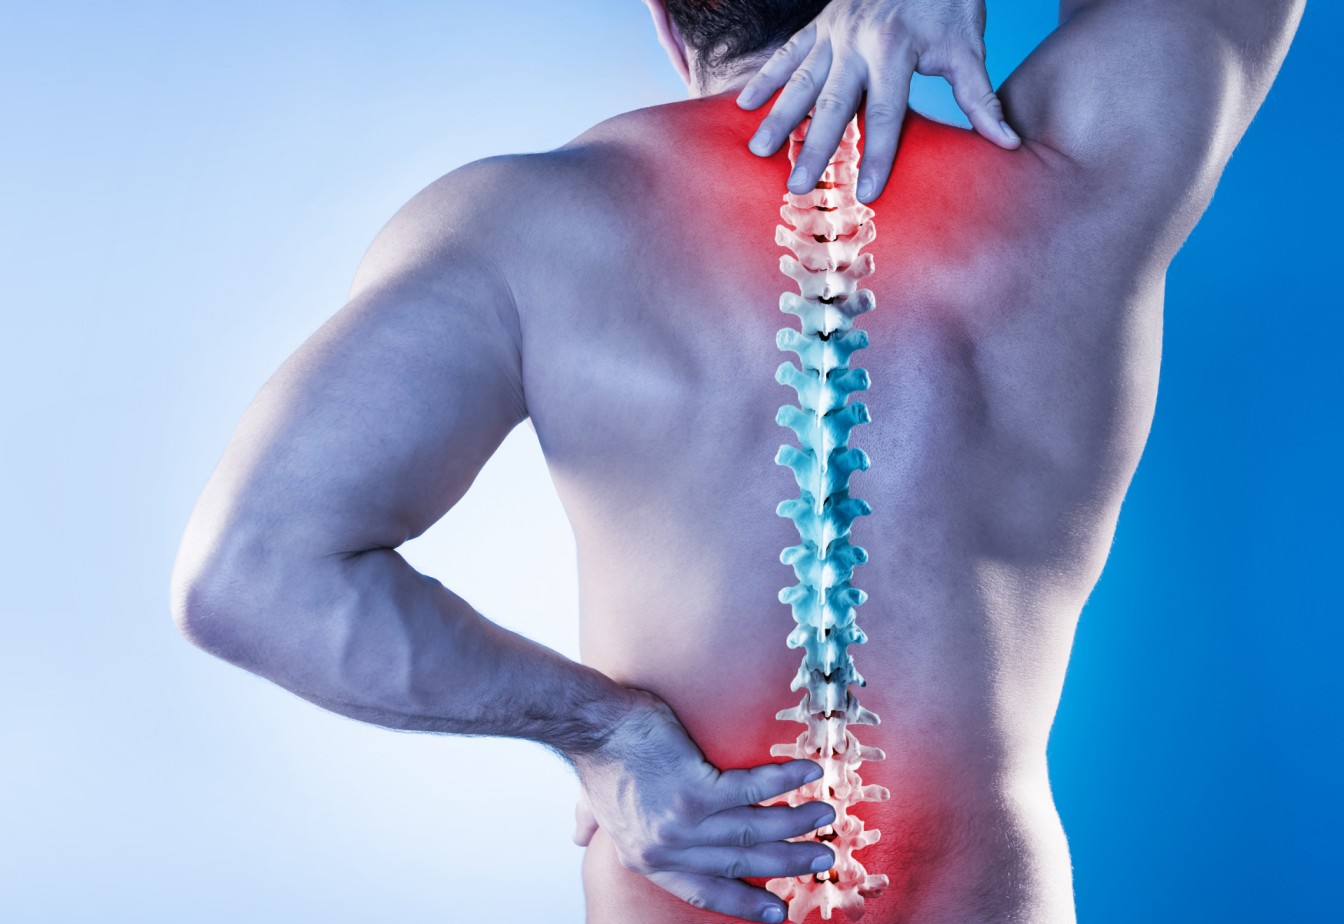 Tips for Preventing and Managing Back Pain in Daily Life